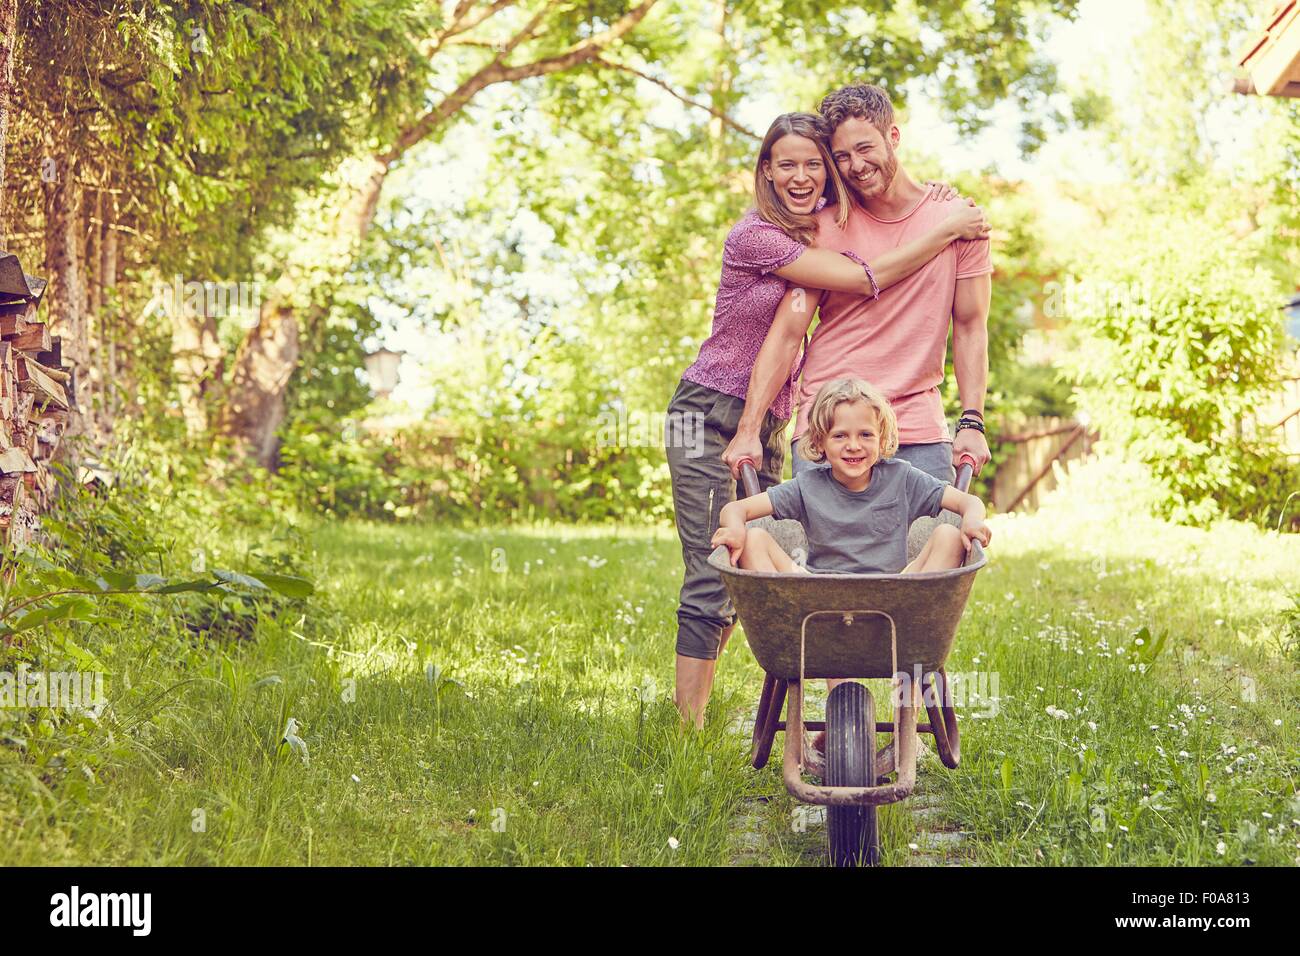 Portrait of young family, father pushing son in wheelbarrow Stock Photo